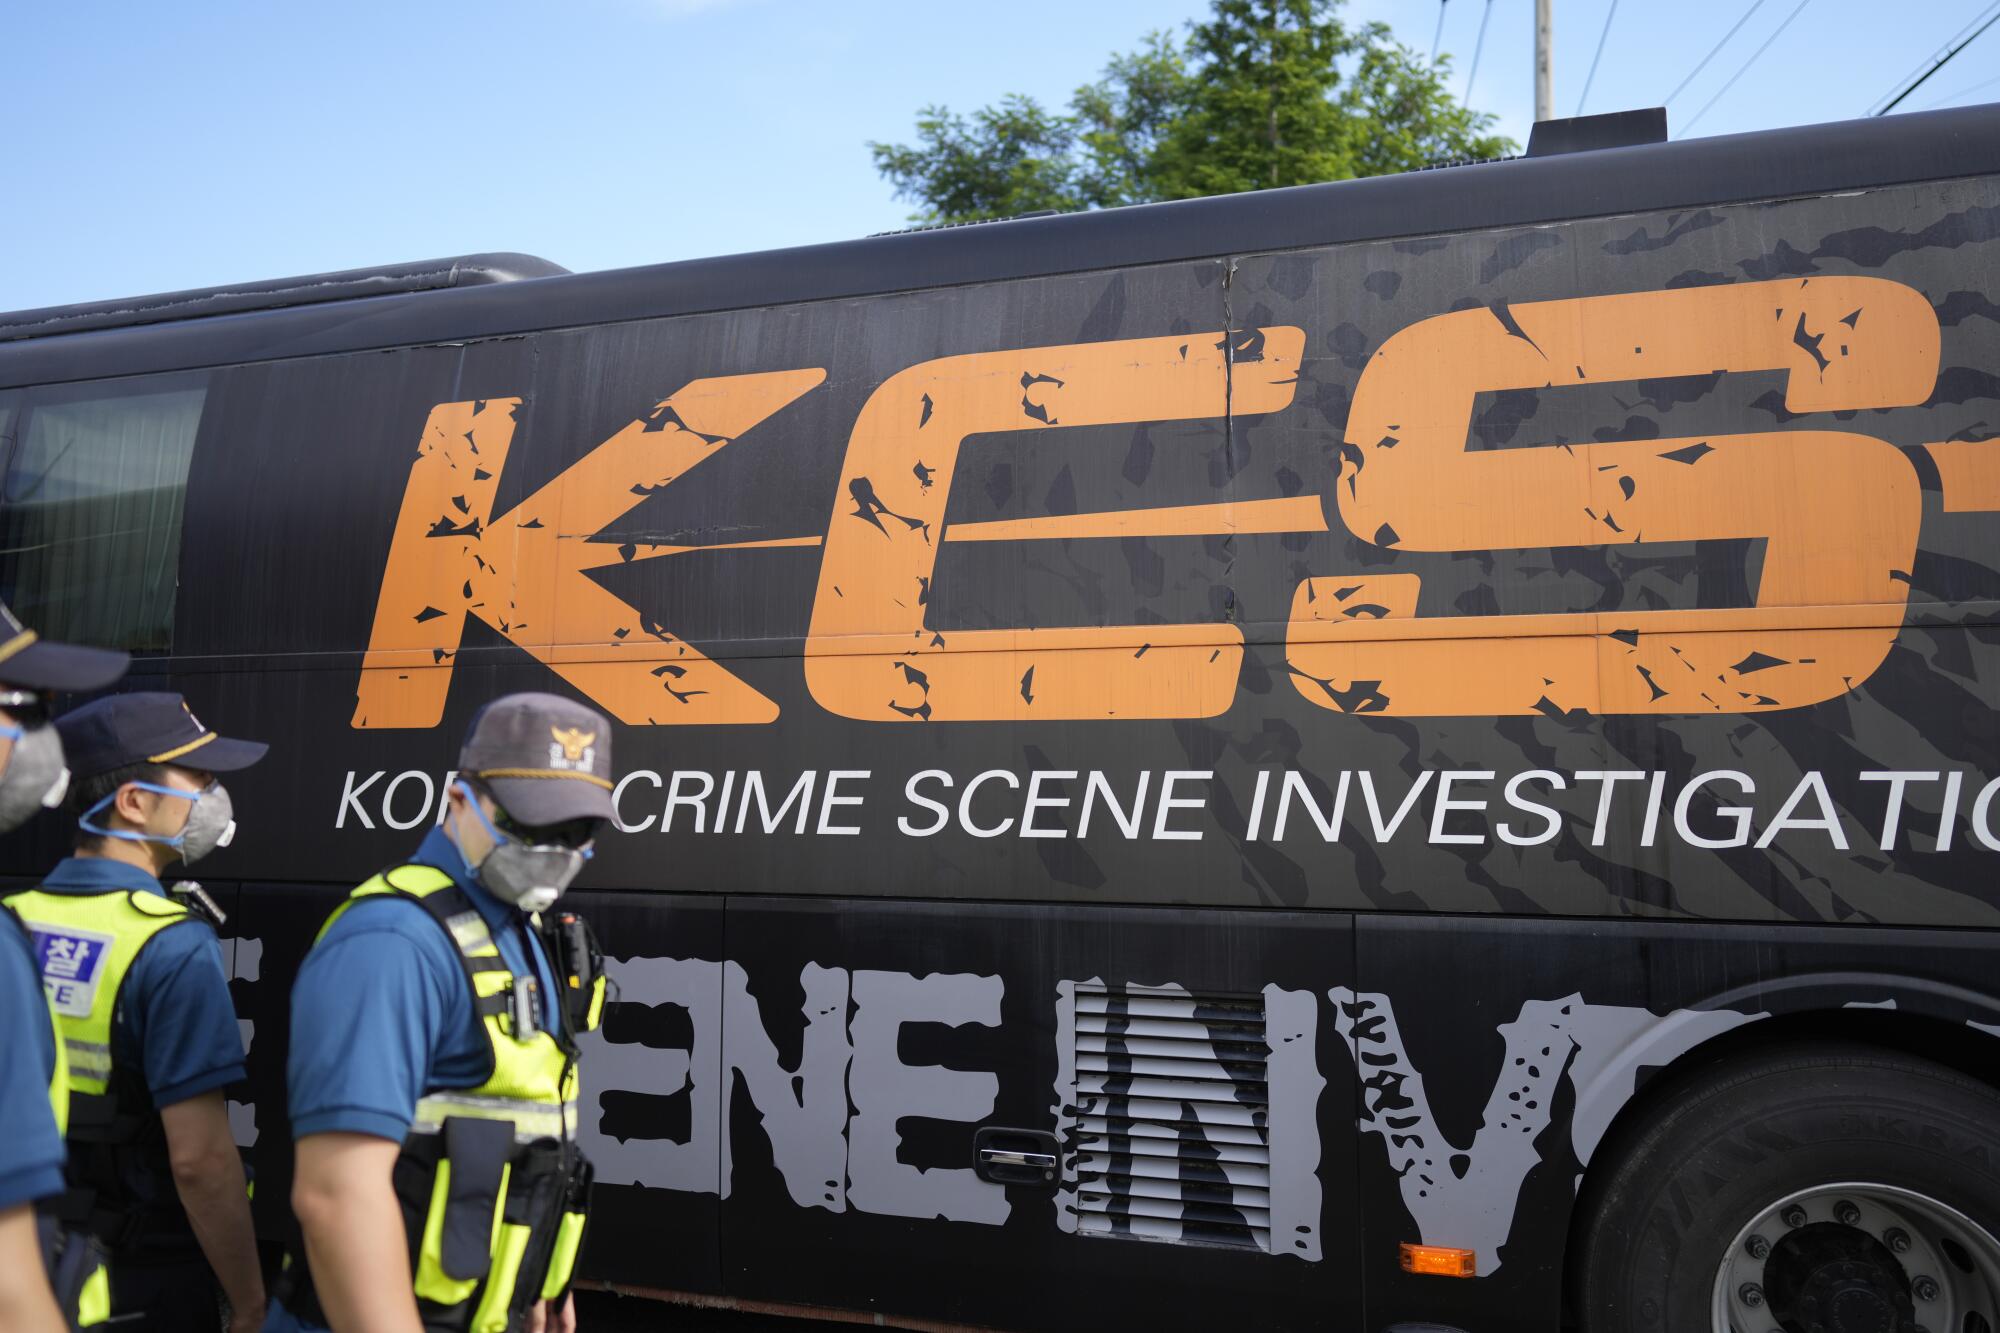 A marked vehicle "crime scene investigation" Workers wearing yellow safety vests pass by.